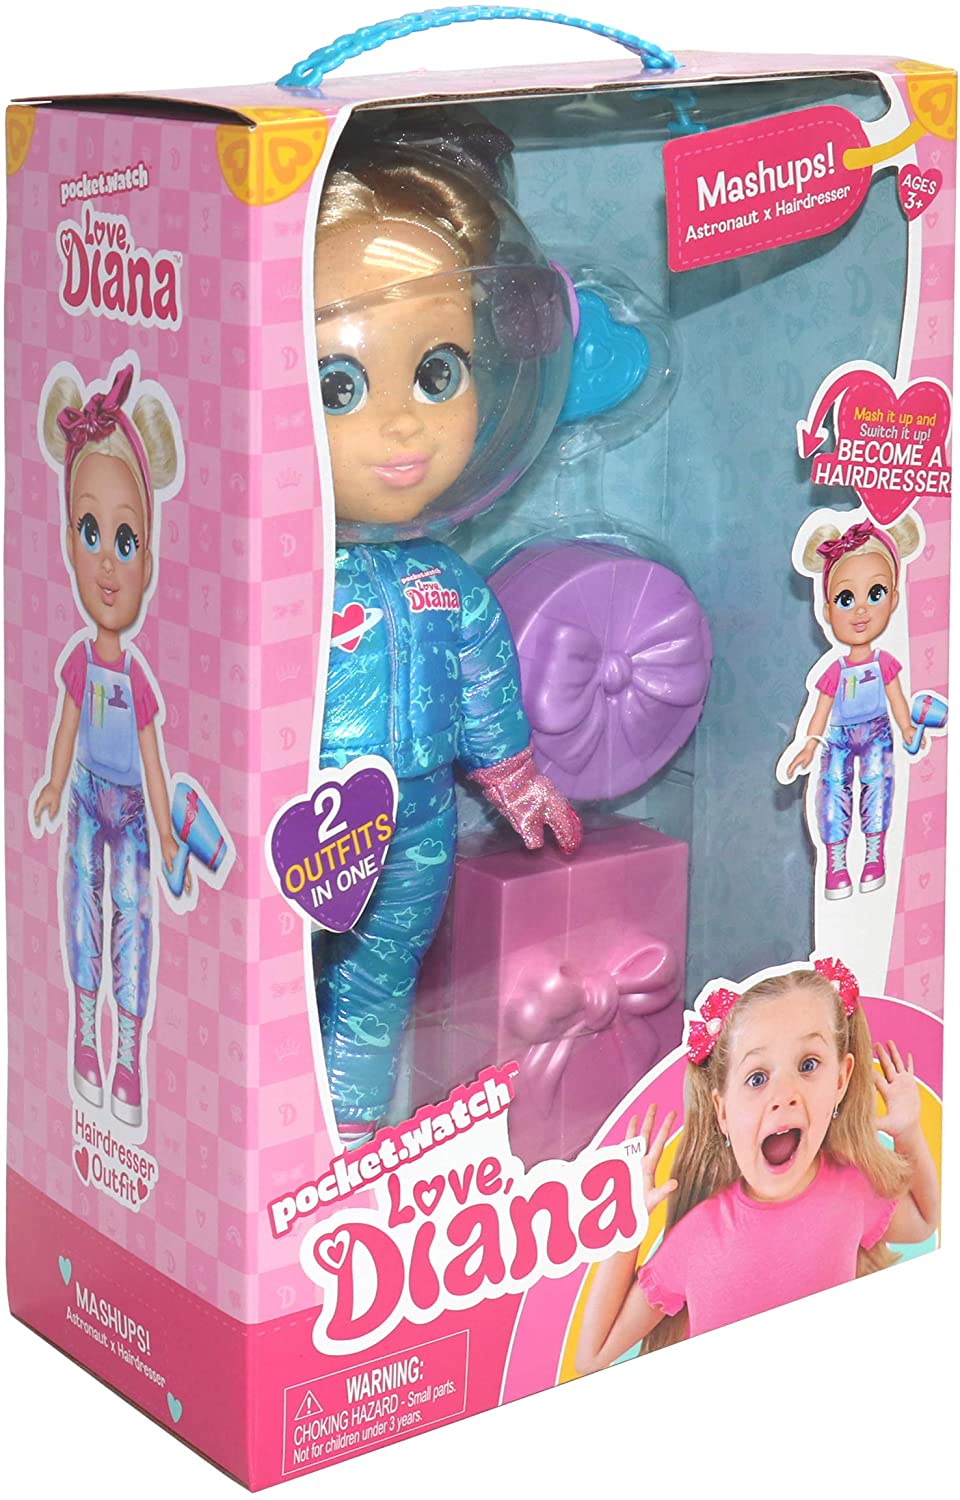 Star Diana, 6, Launching a Kids' Toy and Clothing Line